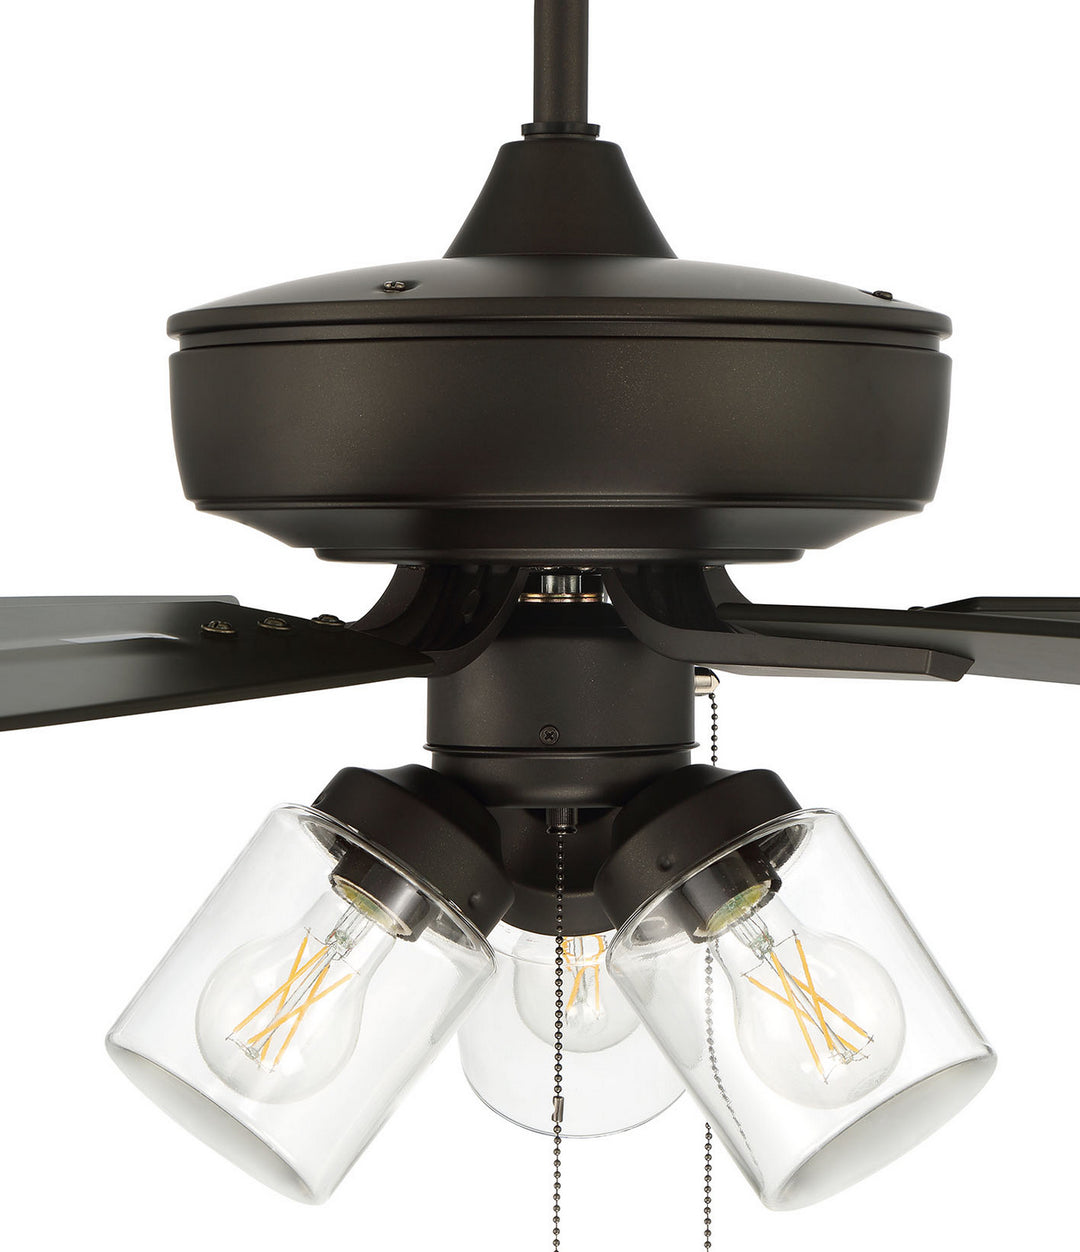 Craftmade Outdoor Pro Plus 104 52" Pull Chain Ceiling Fan with LED Light Kit